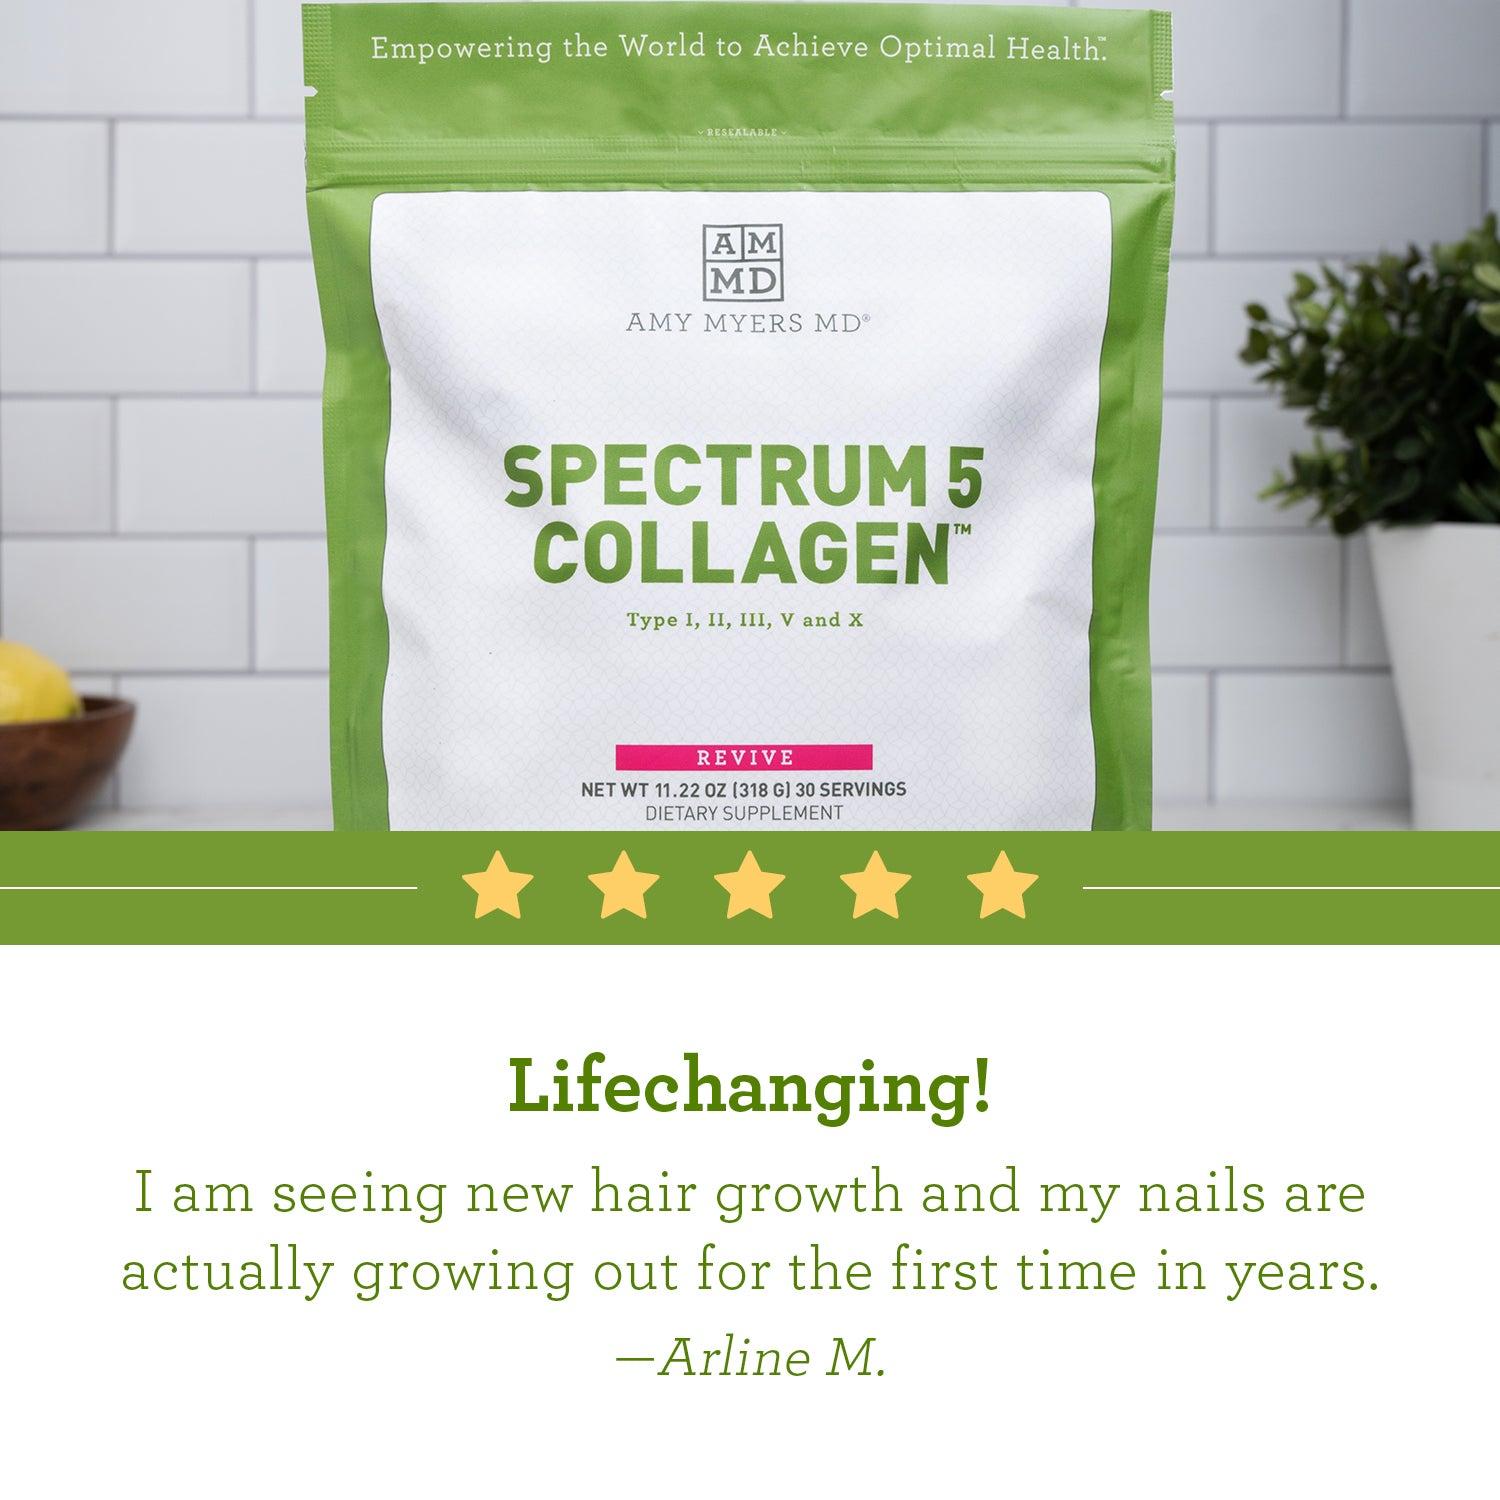 Spectrum 5 Collagen Review Image - Amy Myers MD®